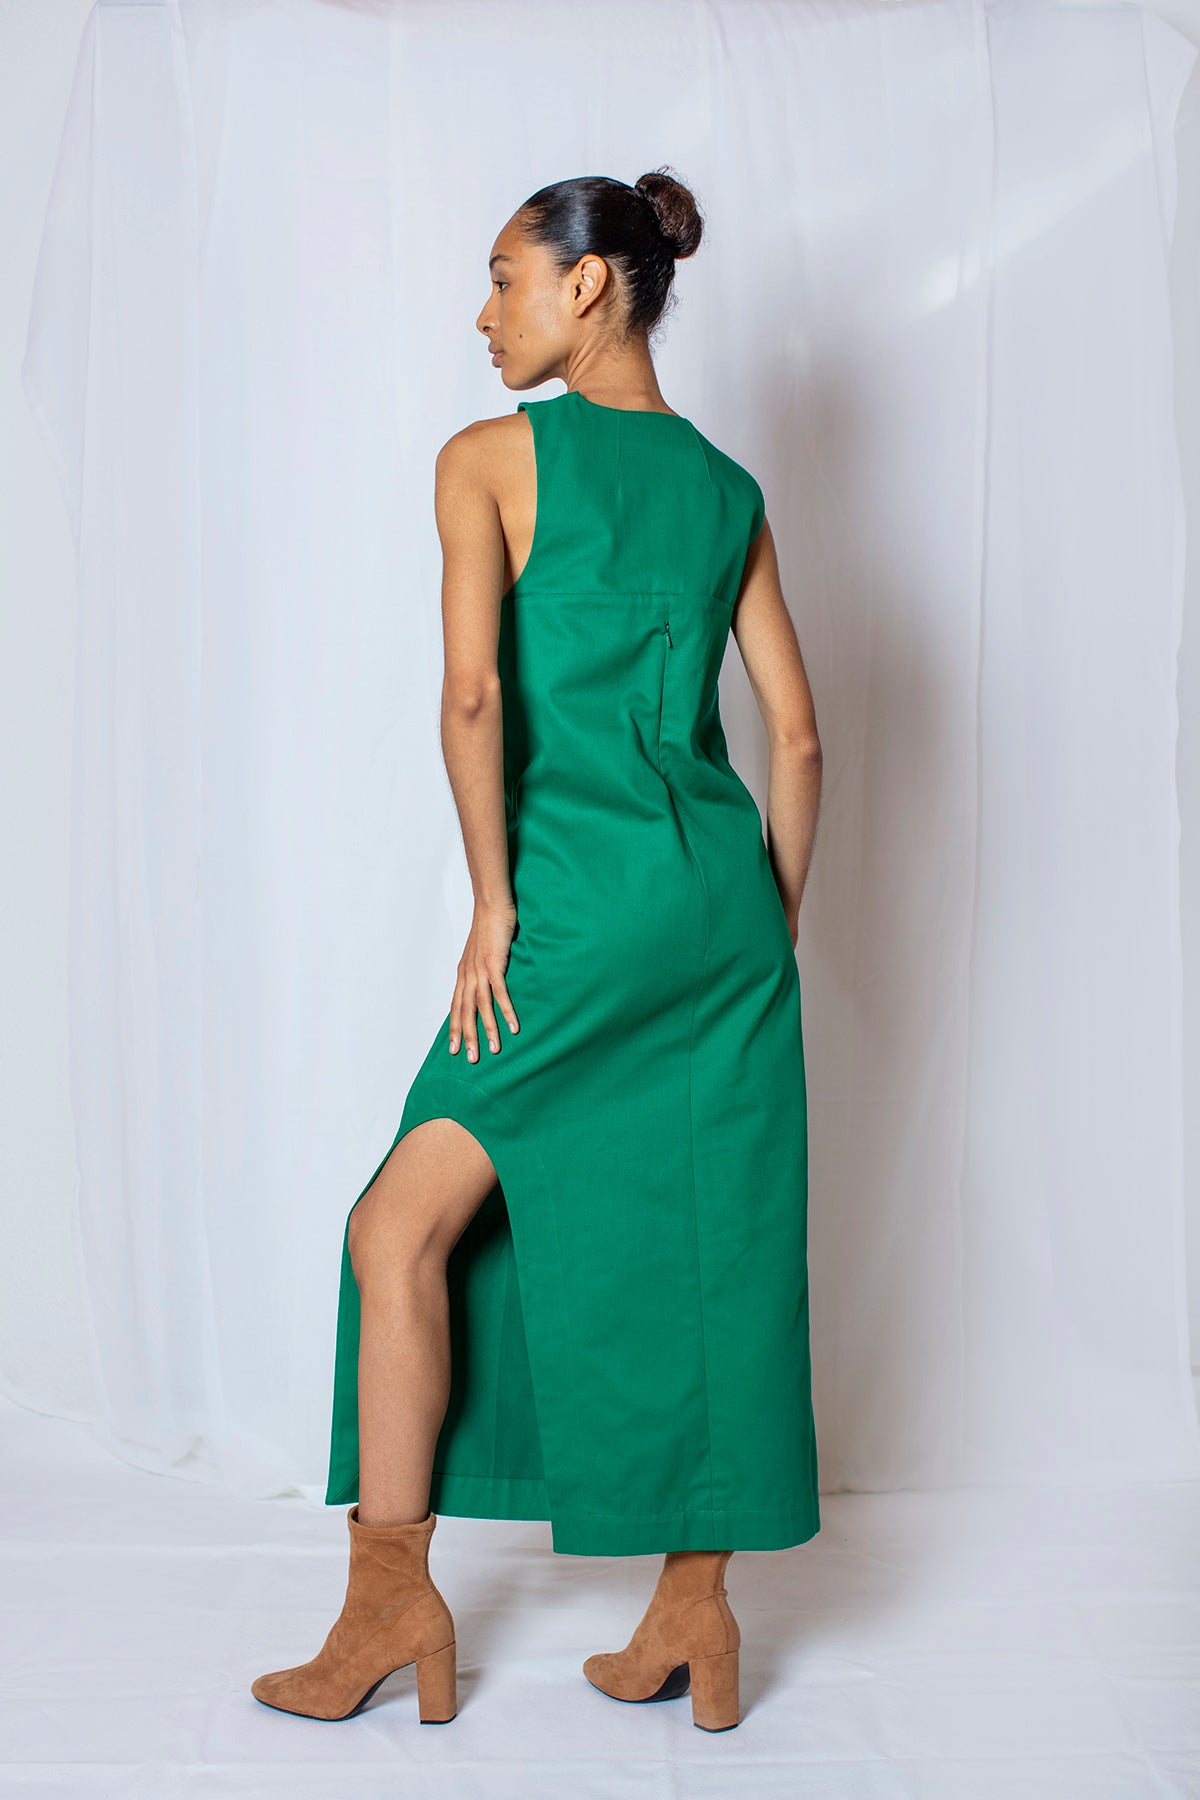 ZGEST Ava Green  Cut-Out Dress from the back